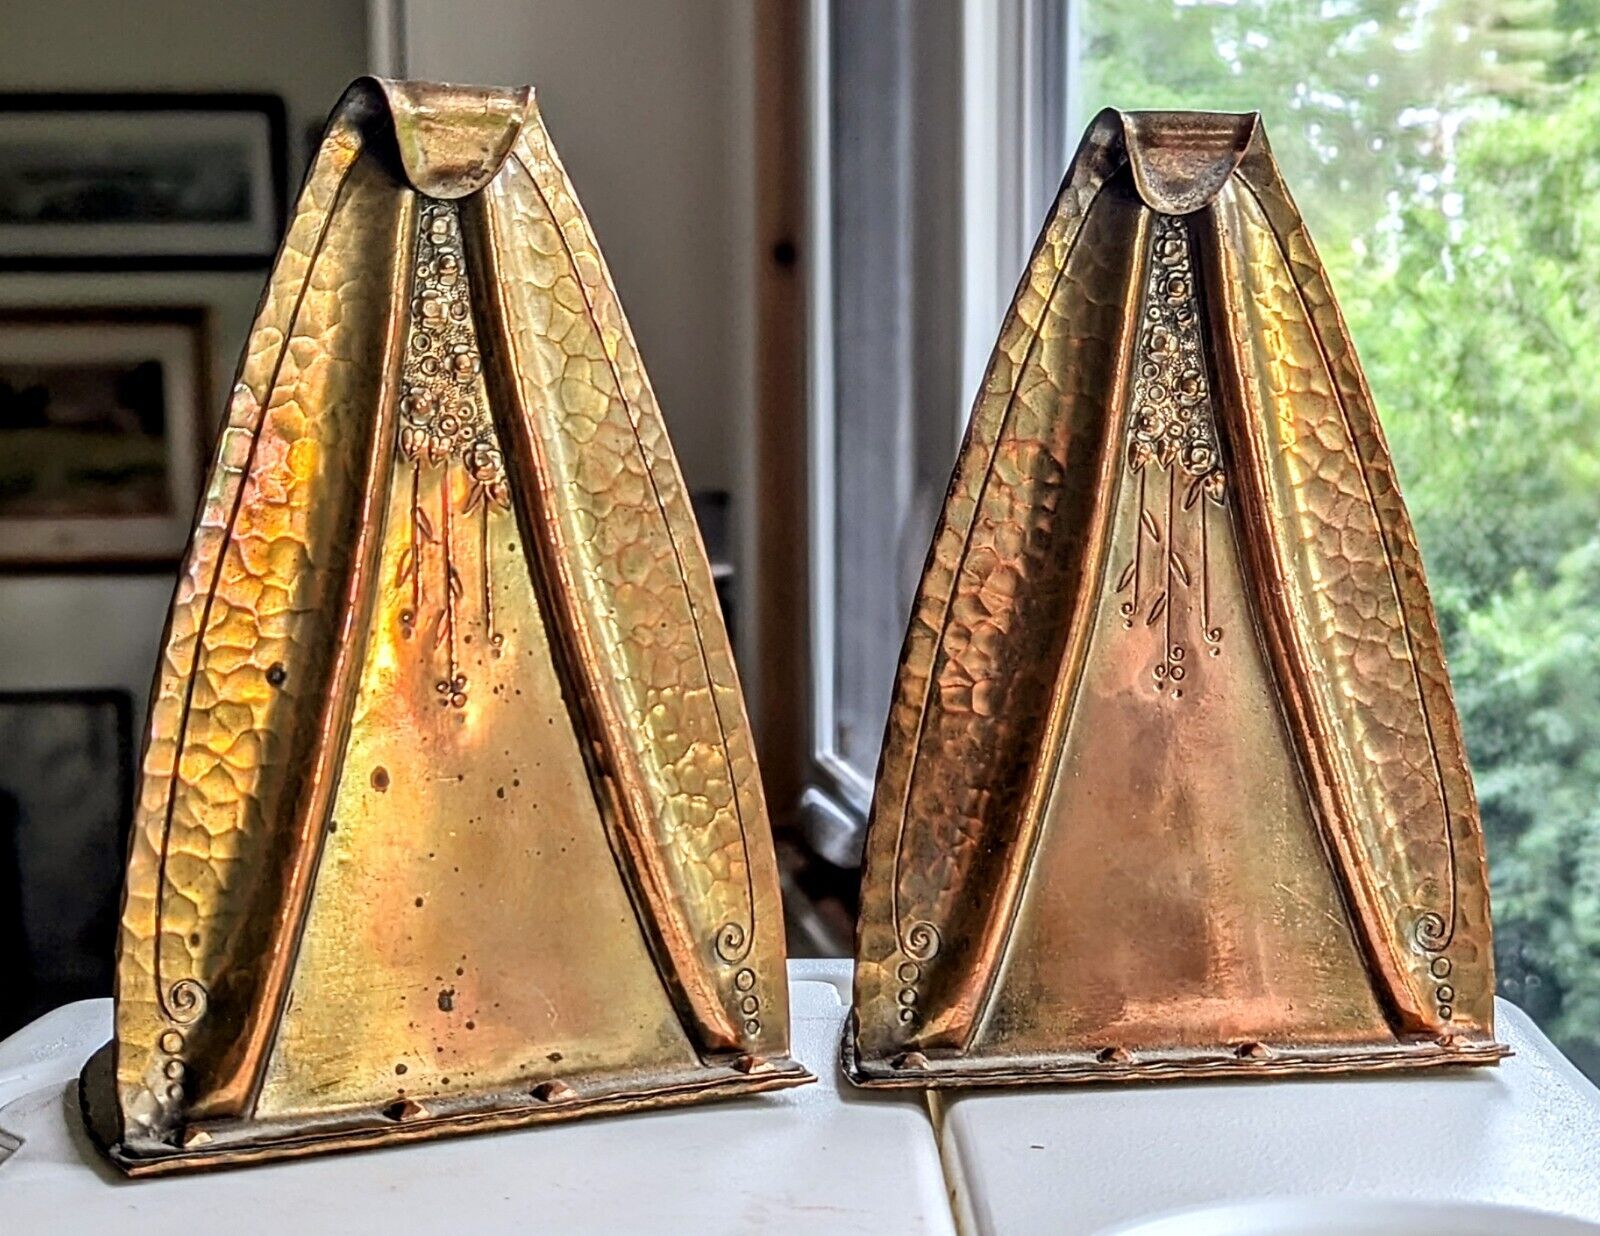 ANTIQUE ROYCROFT~BOOKENDS~ARTS&CRAFTS~MISSION~HAND HAMMERED/TOOLED BRASS c 1915